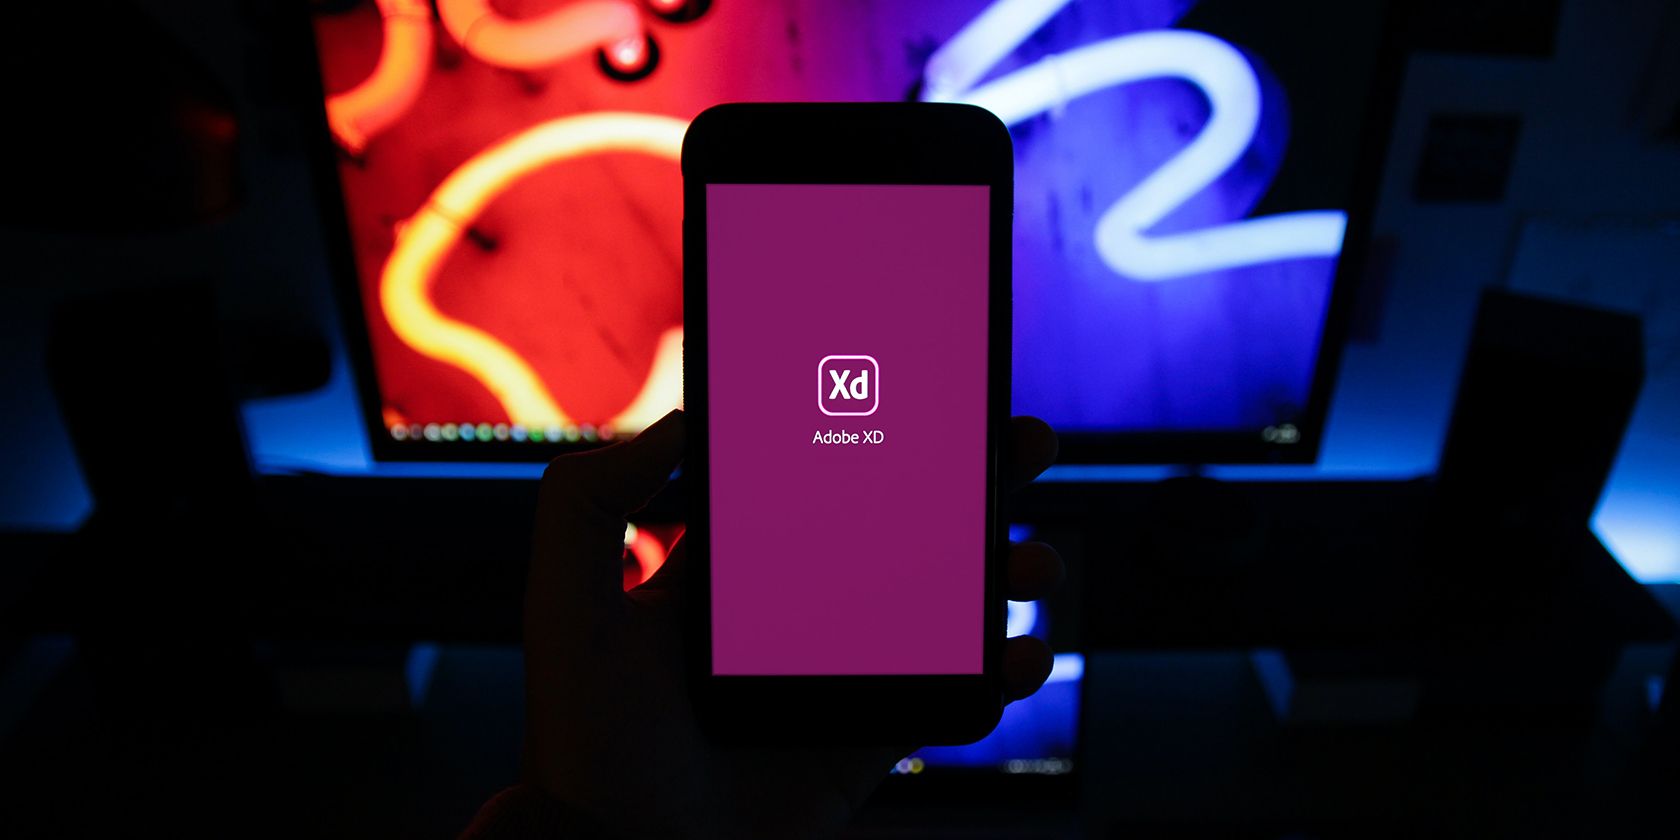 A dark photo of a mobile phone showing the Adobe XD home screen, background consists of lit neon colors on a desktop screen.